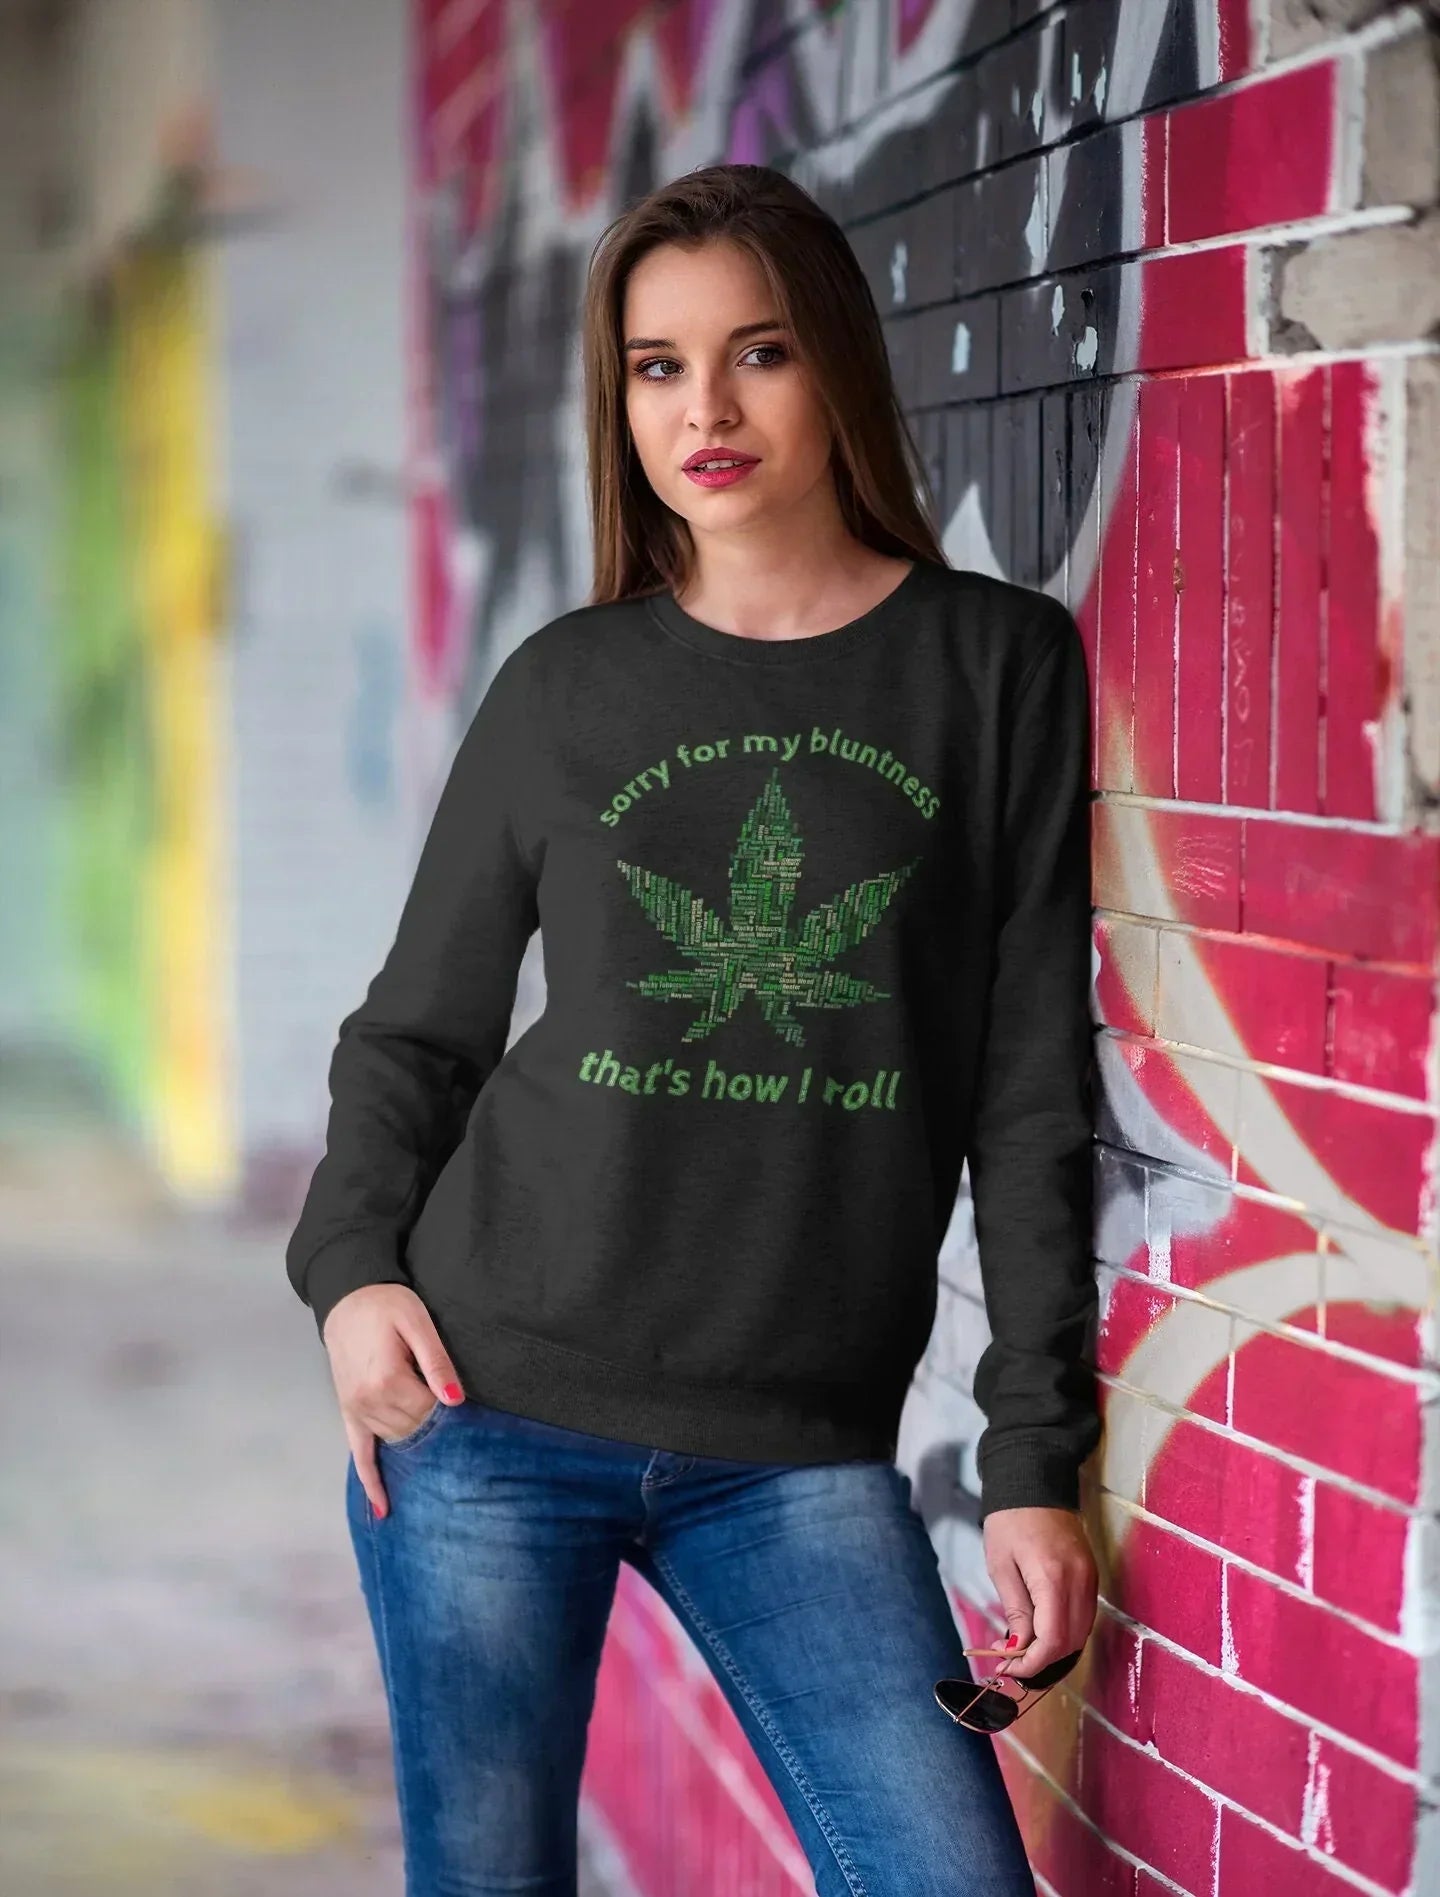 Sorry for My Bluntness, That's How I Roll, Funny Stoner Shirt HMDesignStudioUS